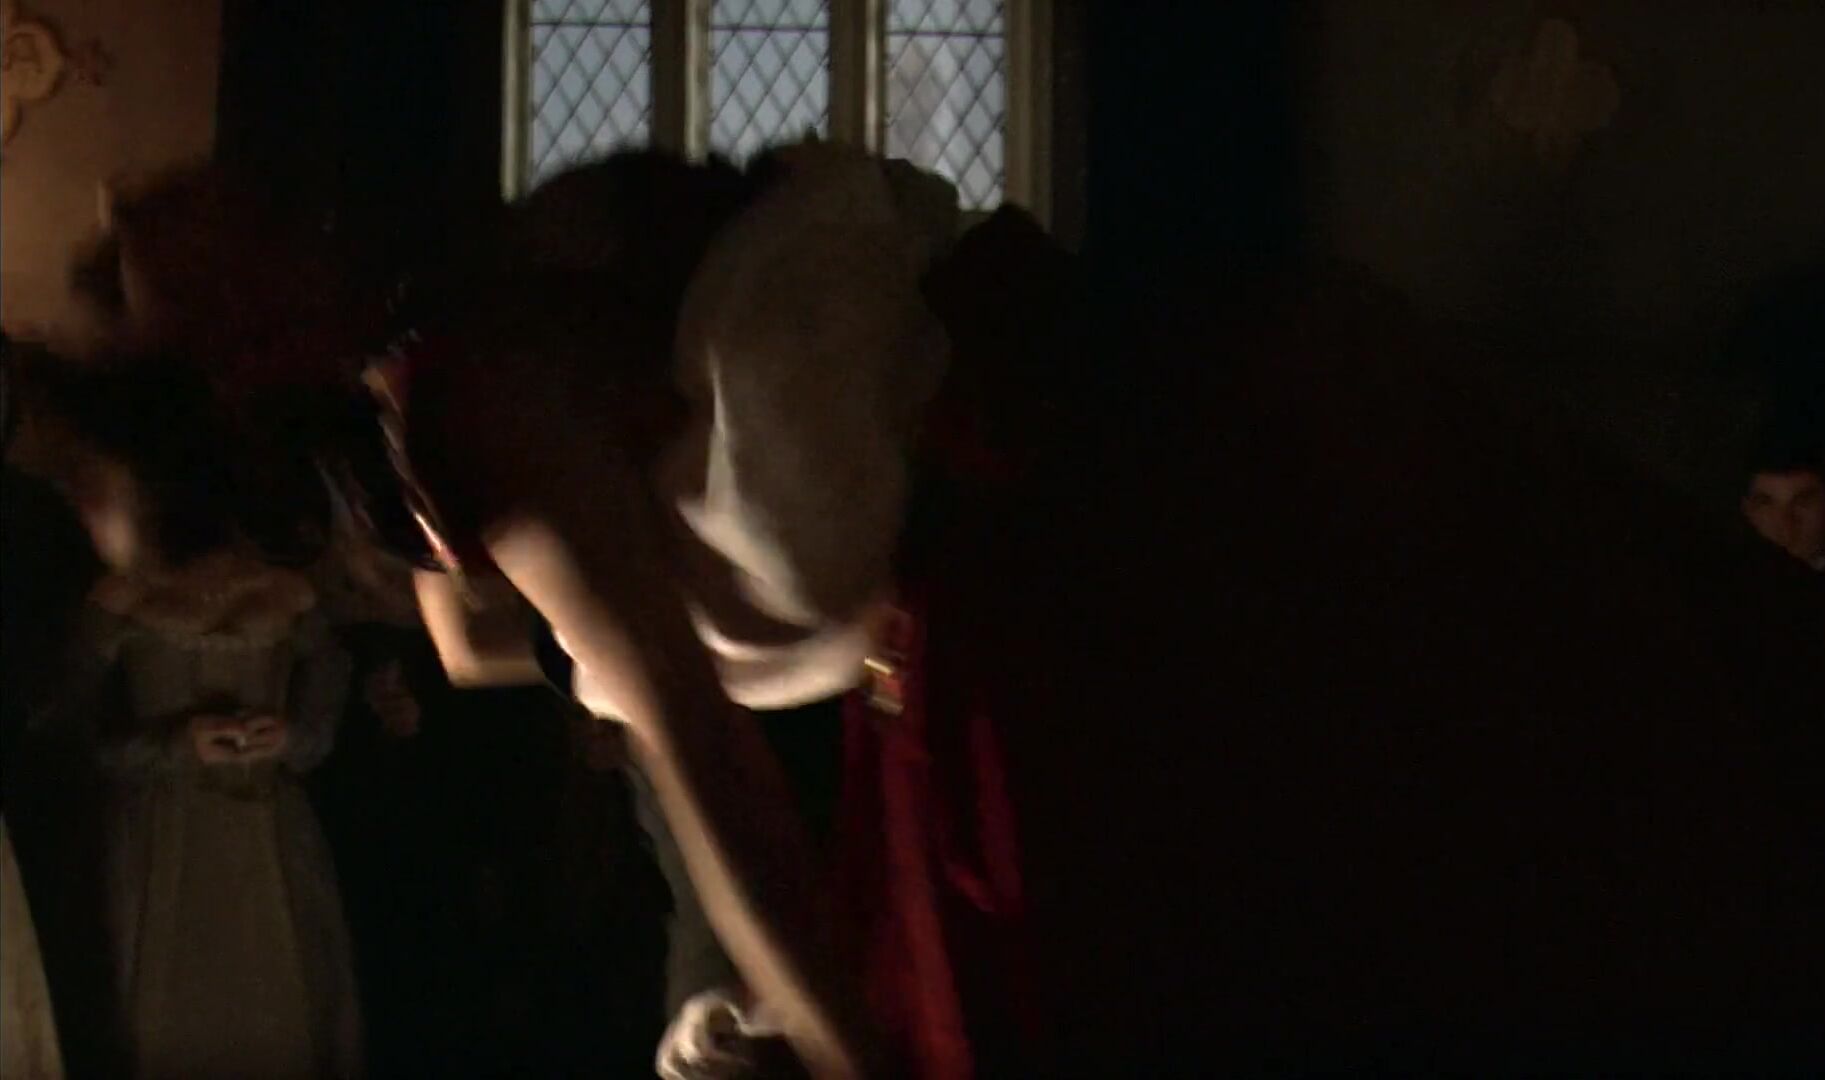 Cbt TV series The Tudors with participation of popular actress Natalie Dormer being fucked Buttplug - 1